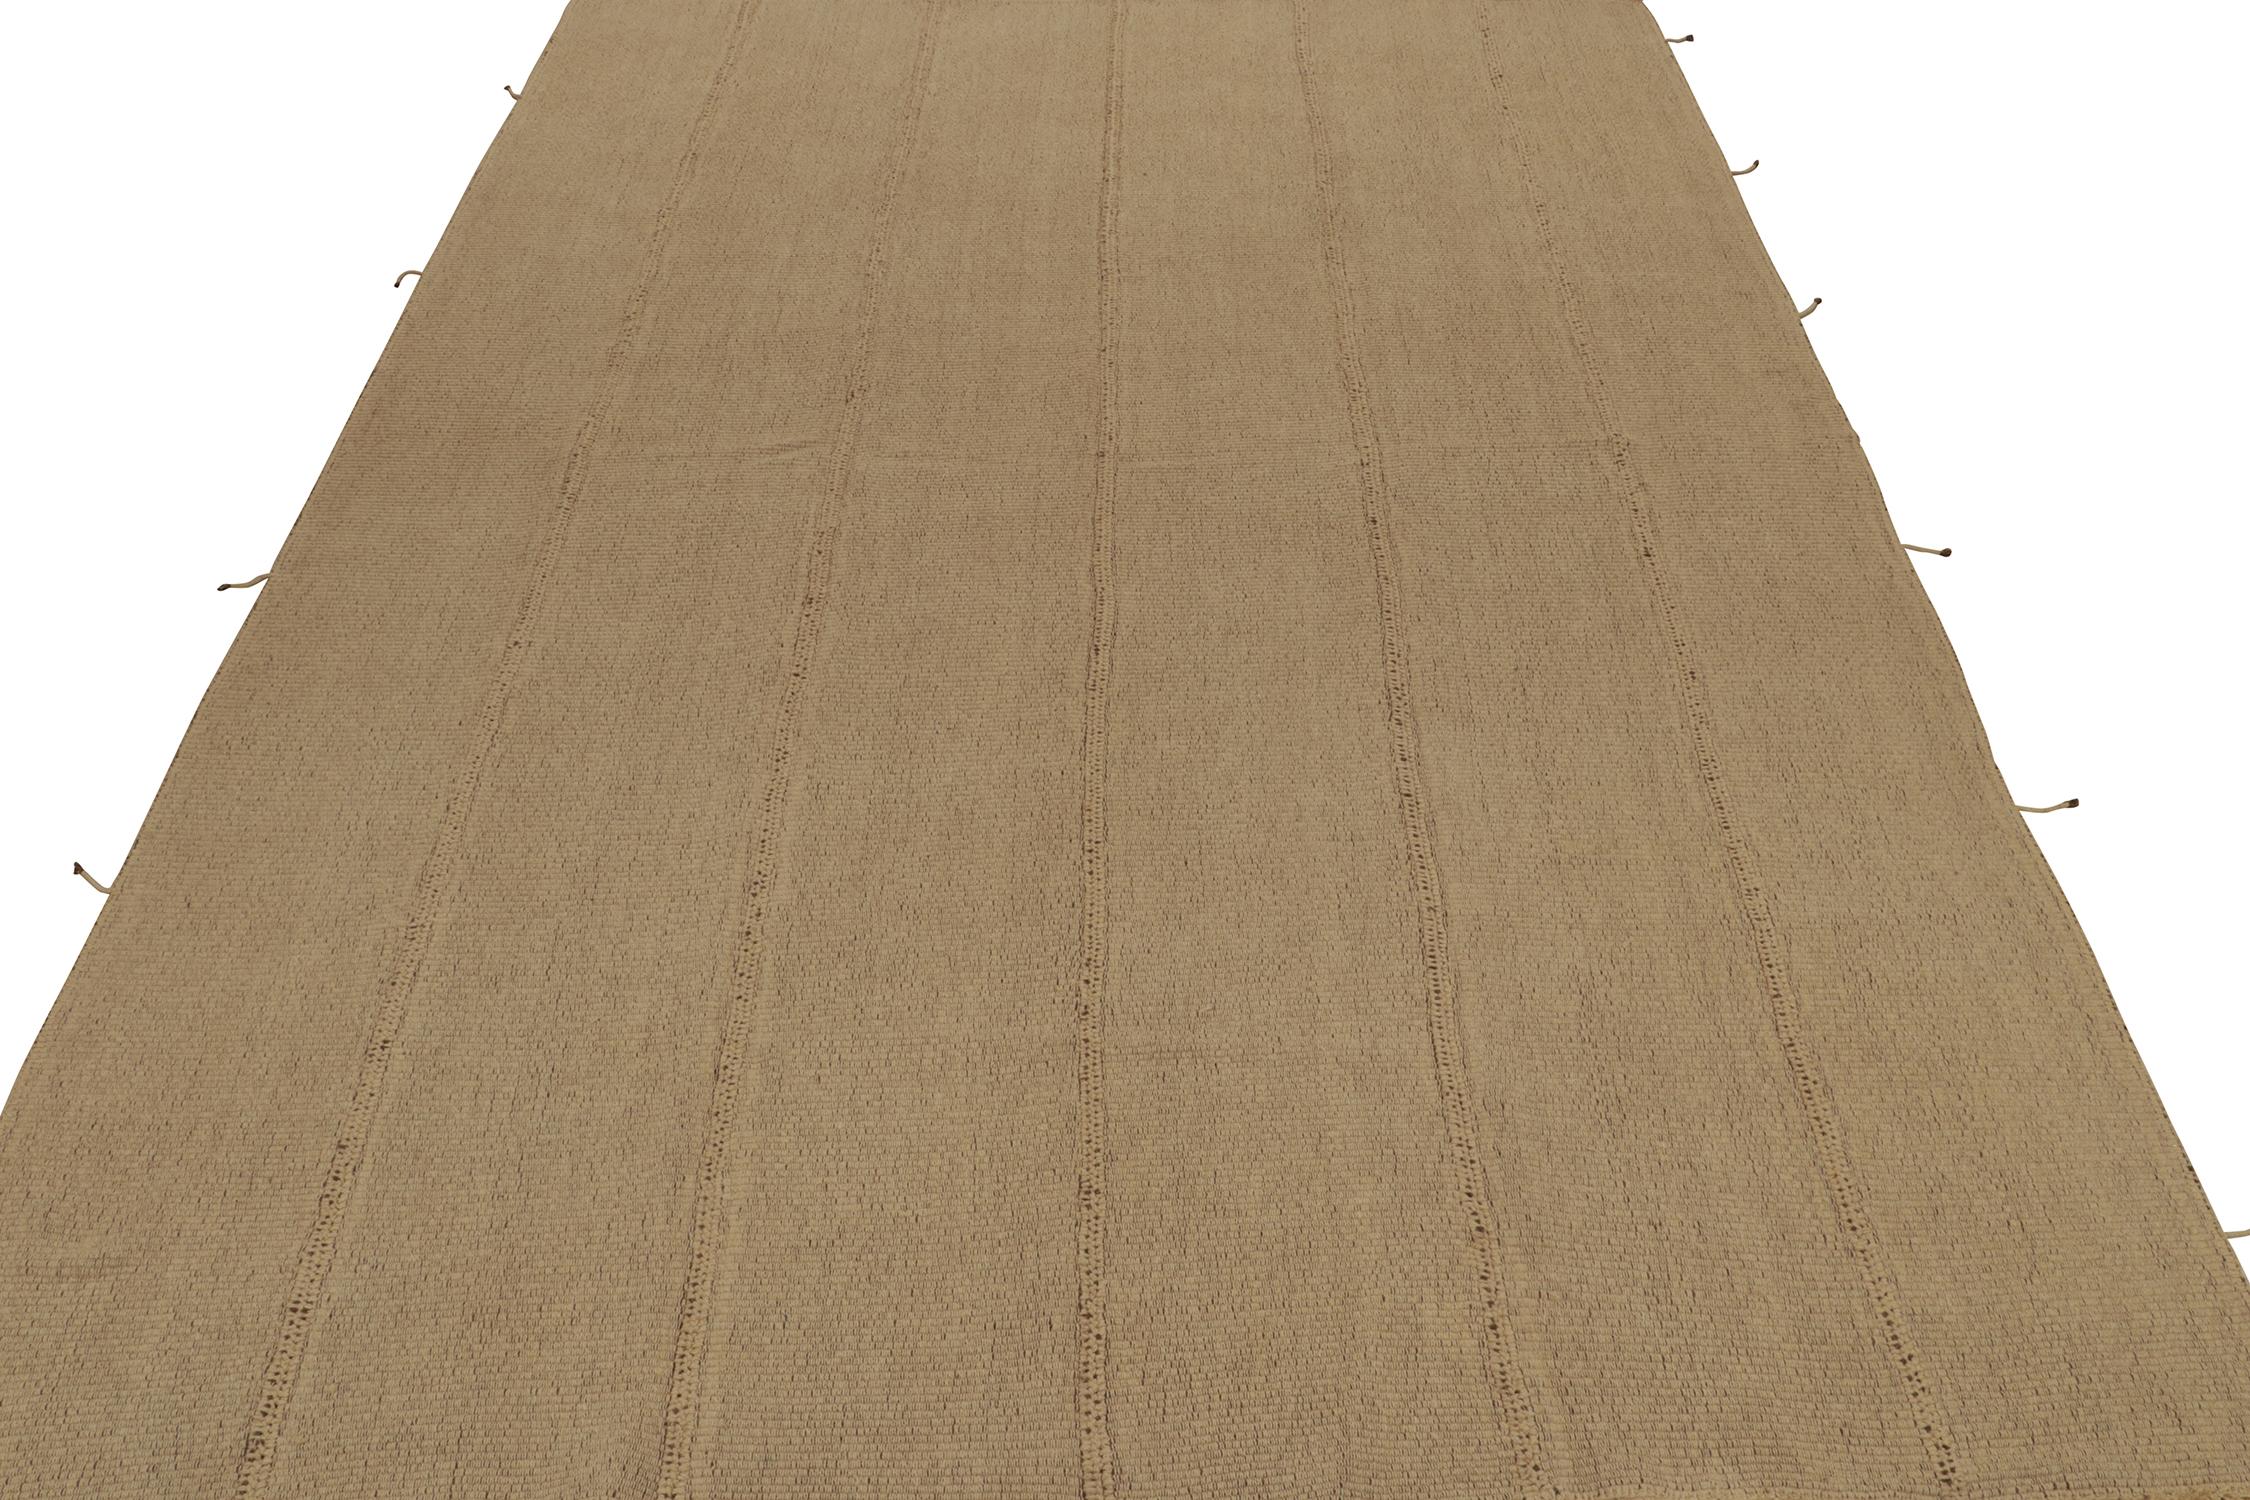 Modern Rug & Kilim’s Contemporary Kilim in Sandy, Solid Beige-Brown Panel Woven Style For Sale